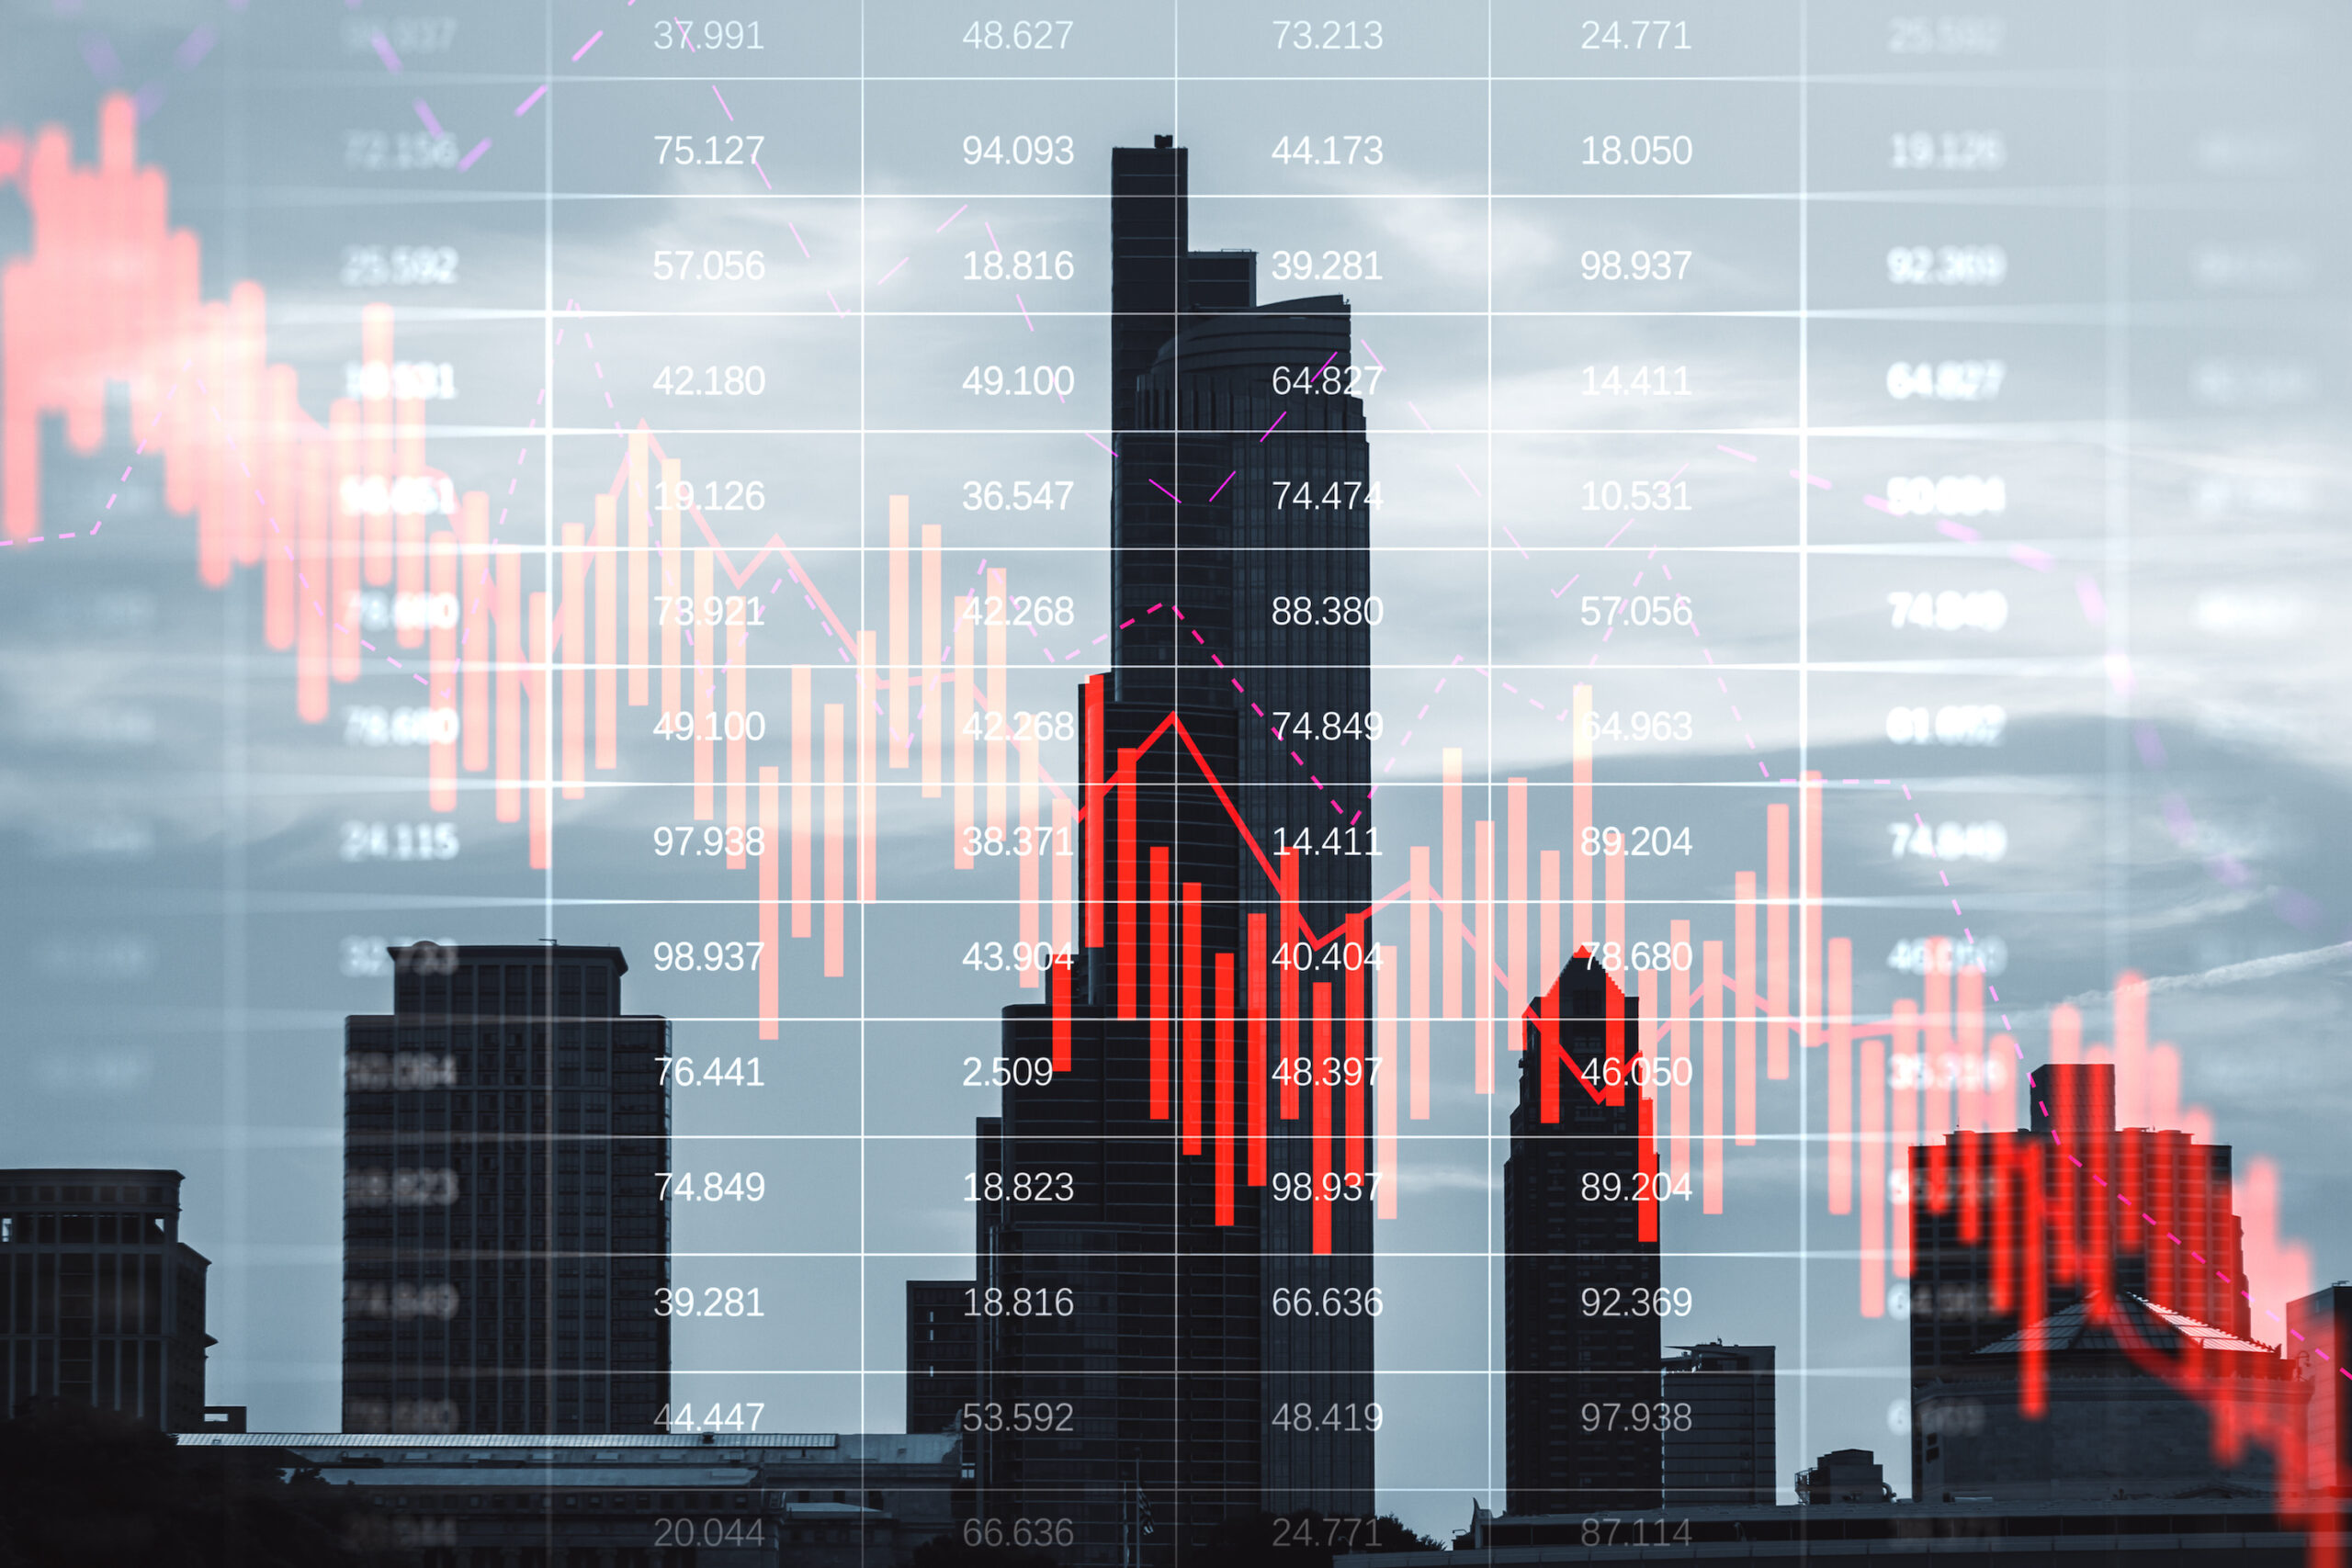 Real estate market and commercial property crisis concept with red falling graph and city on background, double exposure